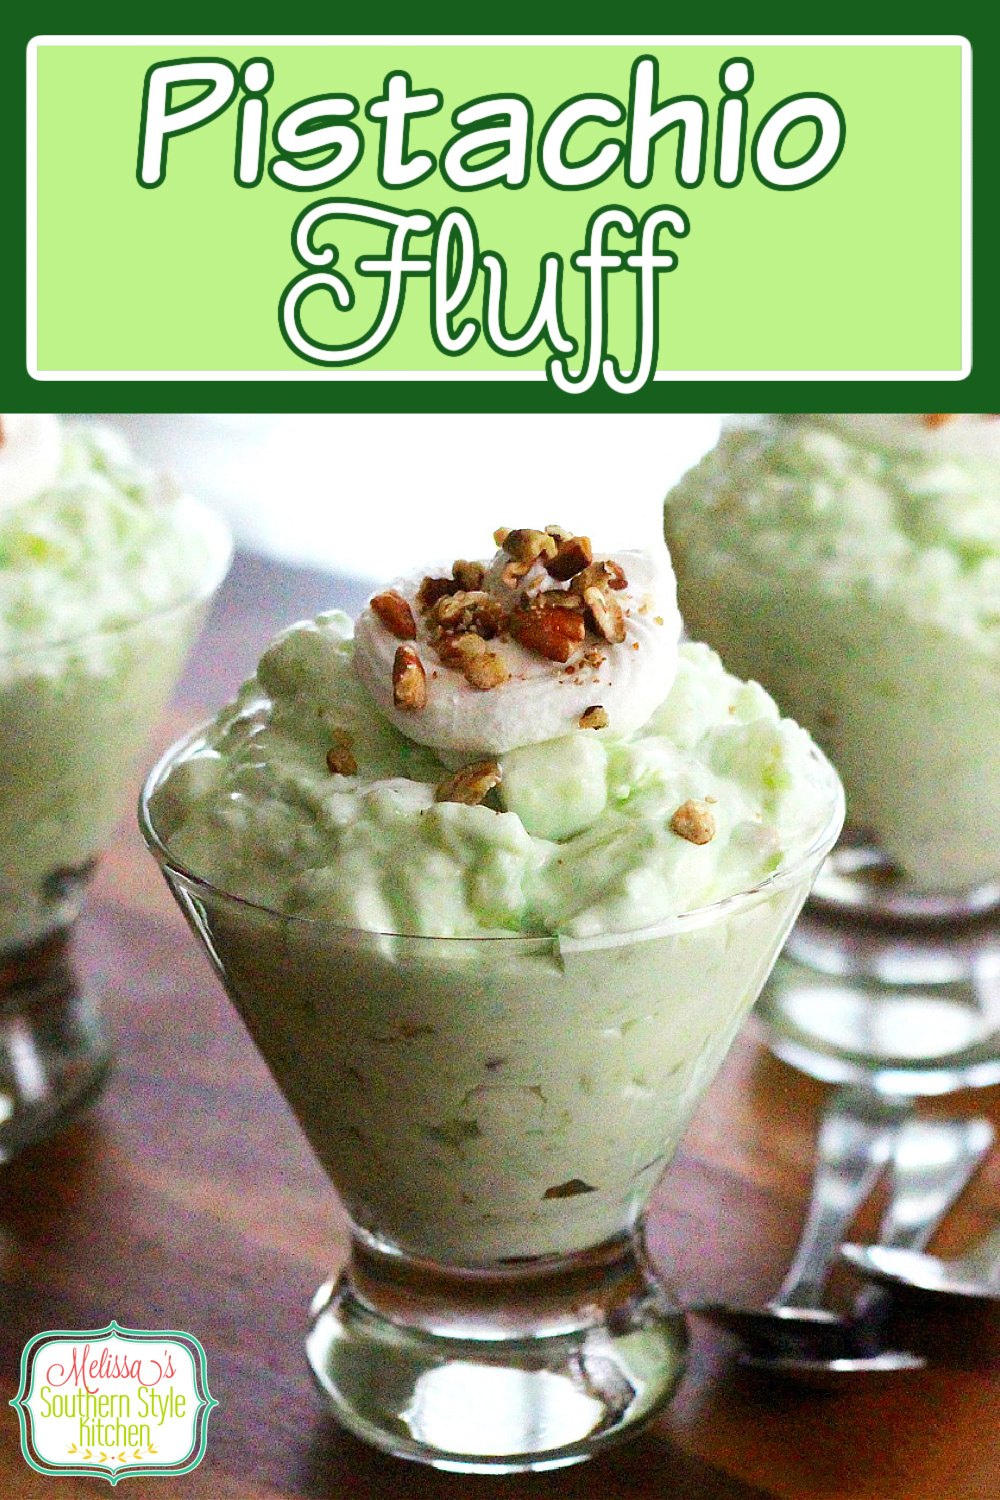 This scrumptious Pistachio Fluff a.k.a. Watergate Salad, is a vintage fruity dessert that you're sure to find yourself making over and over again. #pistachiofluff #fluffrecipes #watergatesalad #nobakedesserts #pistachio #holidayrecipes #desserts #dessertfoodrecipes #southernfood #southernrecipes